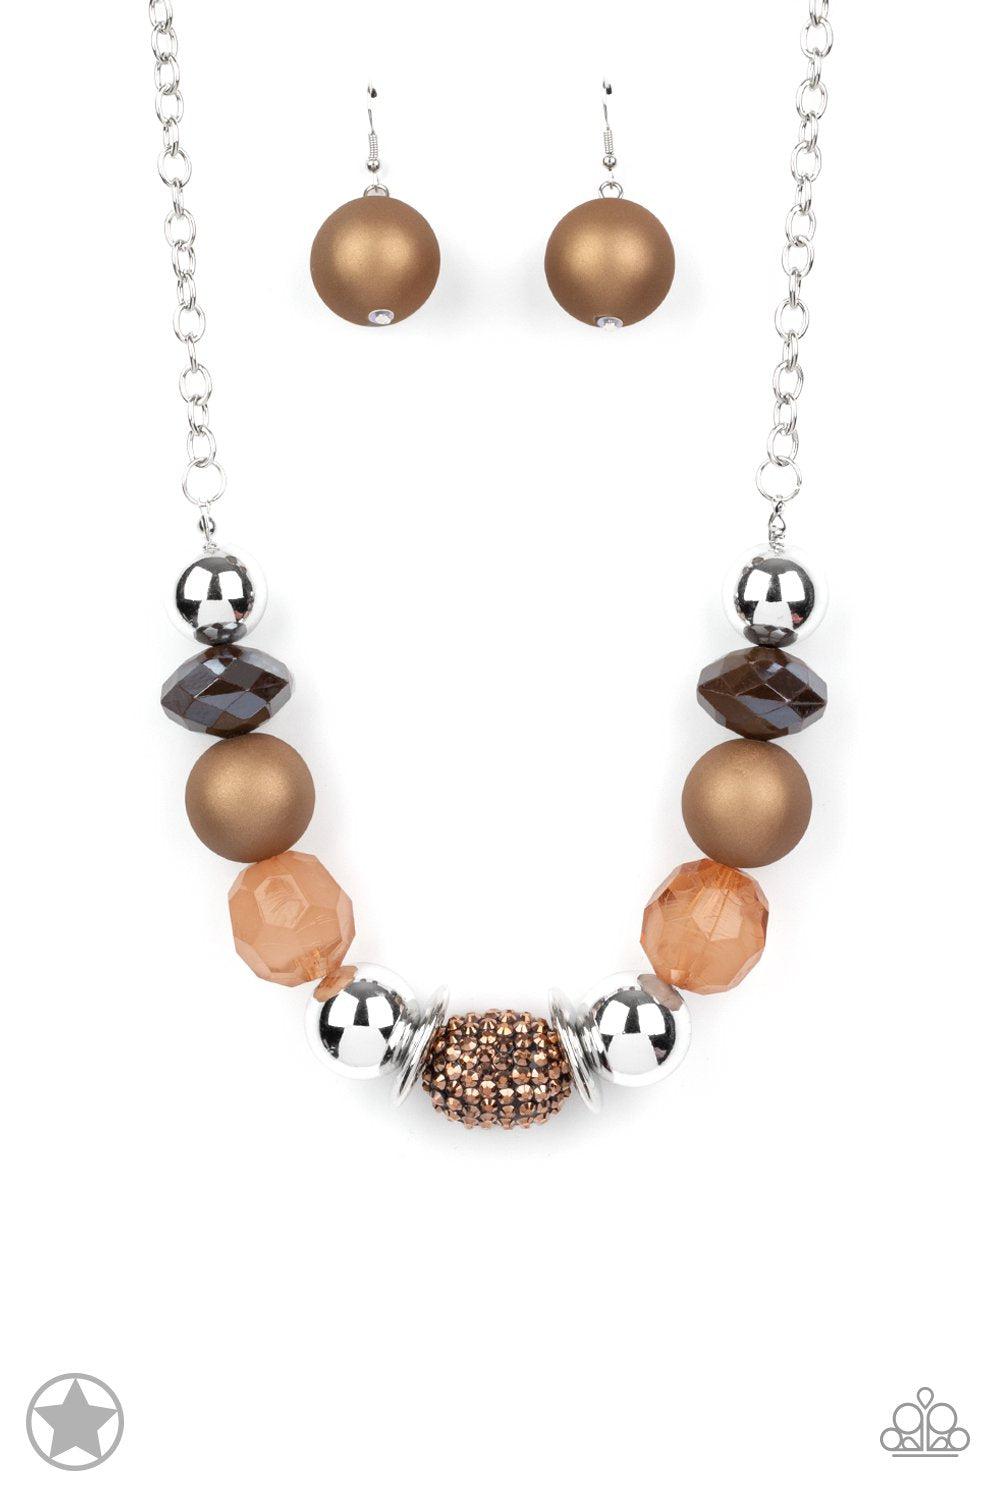 A Warm Welcome Copper Bead Necklace and matching Earrings - Paparazzi Accessories - lightbox -CarasShop.com - $5 Jewelry by Cara Jewels